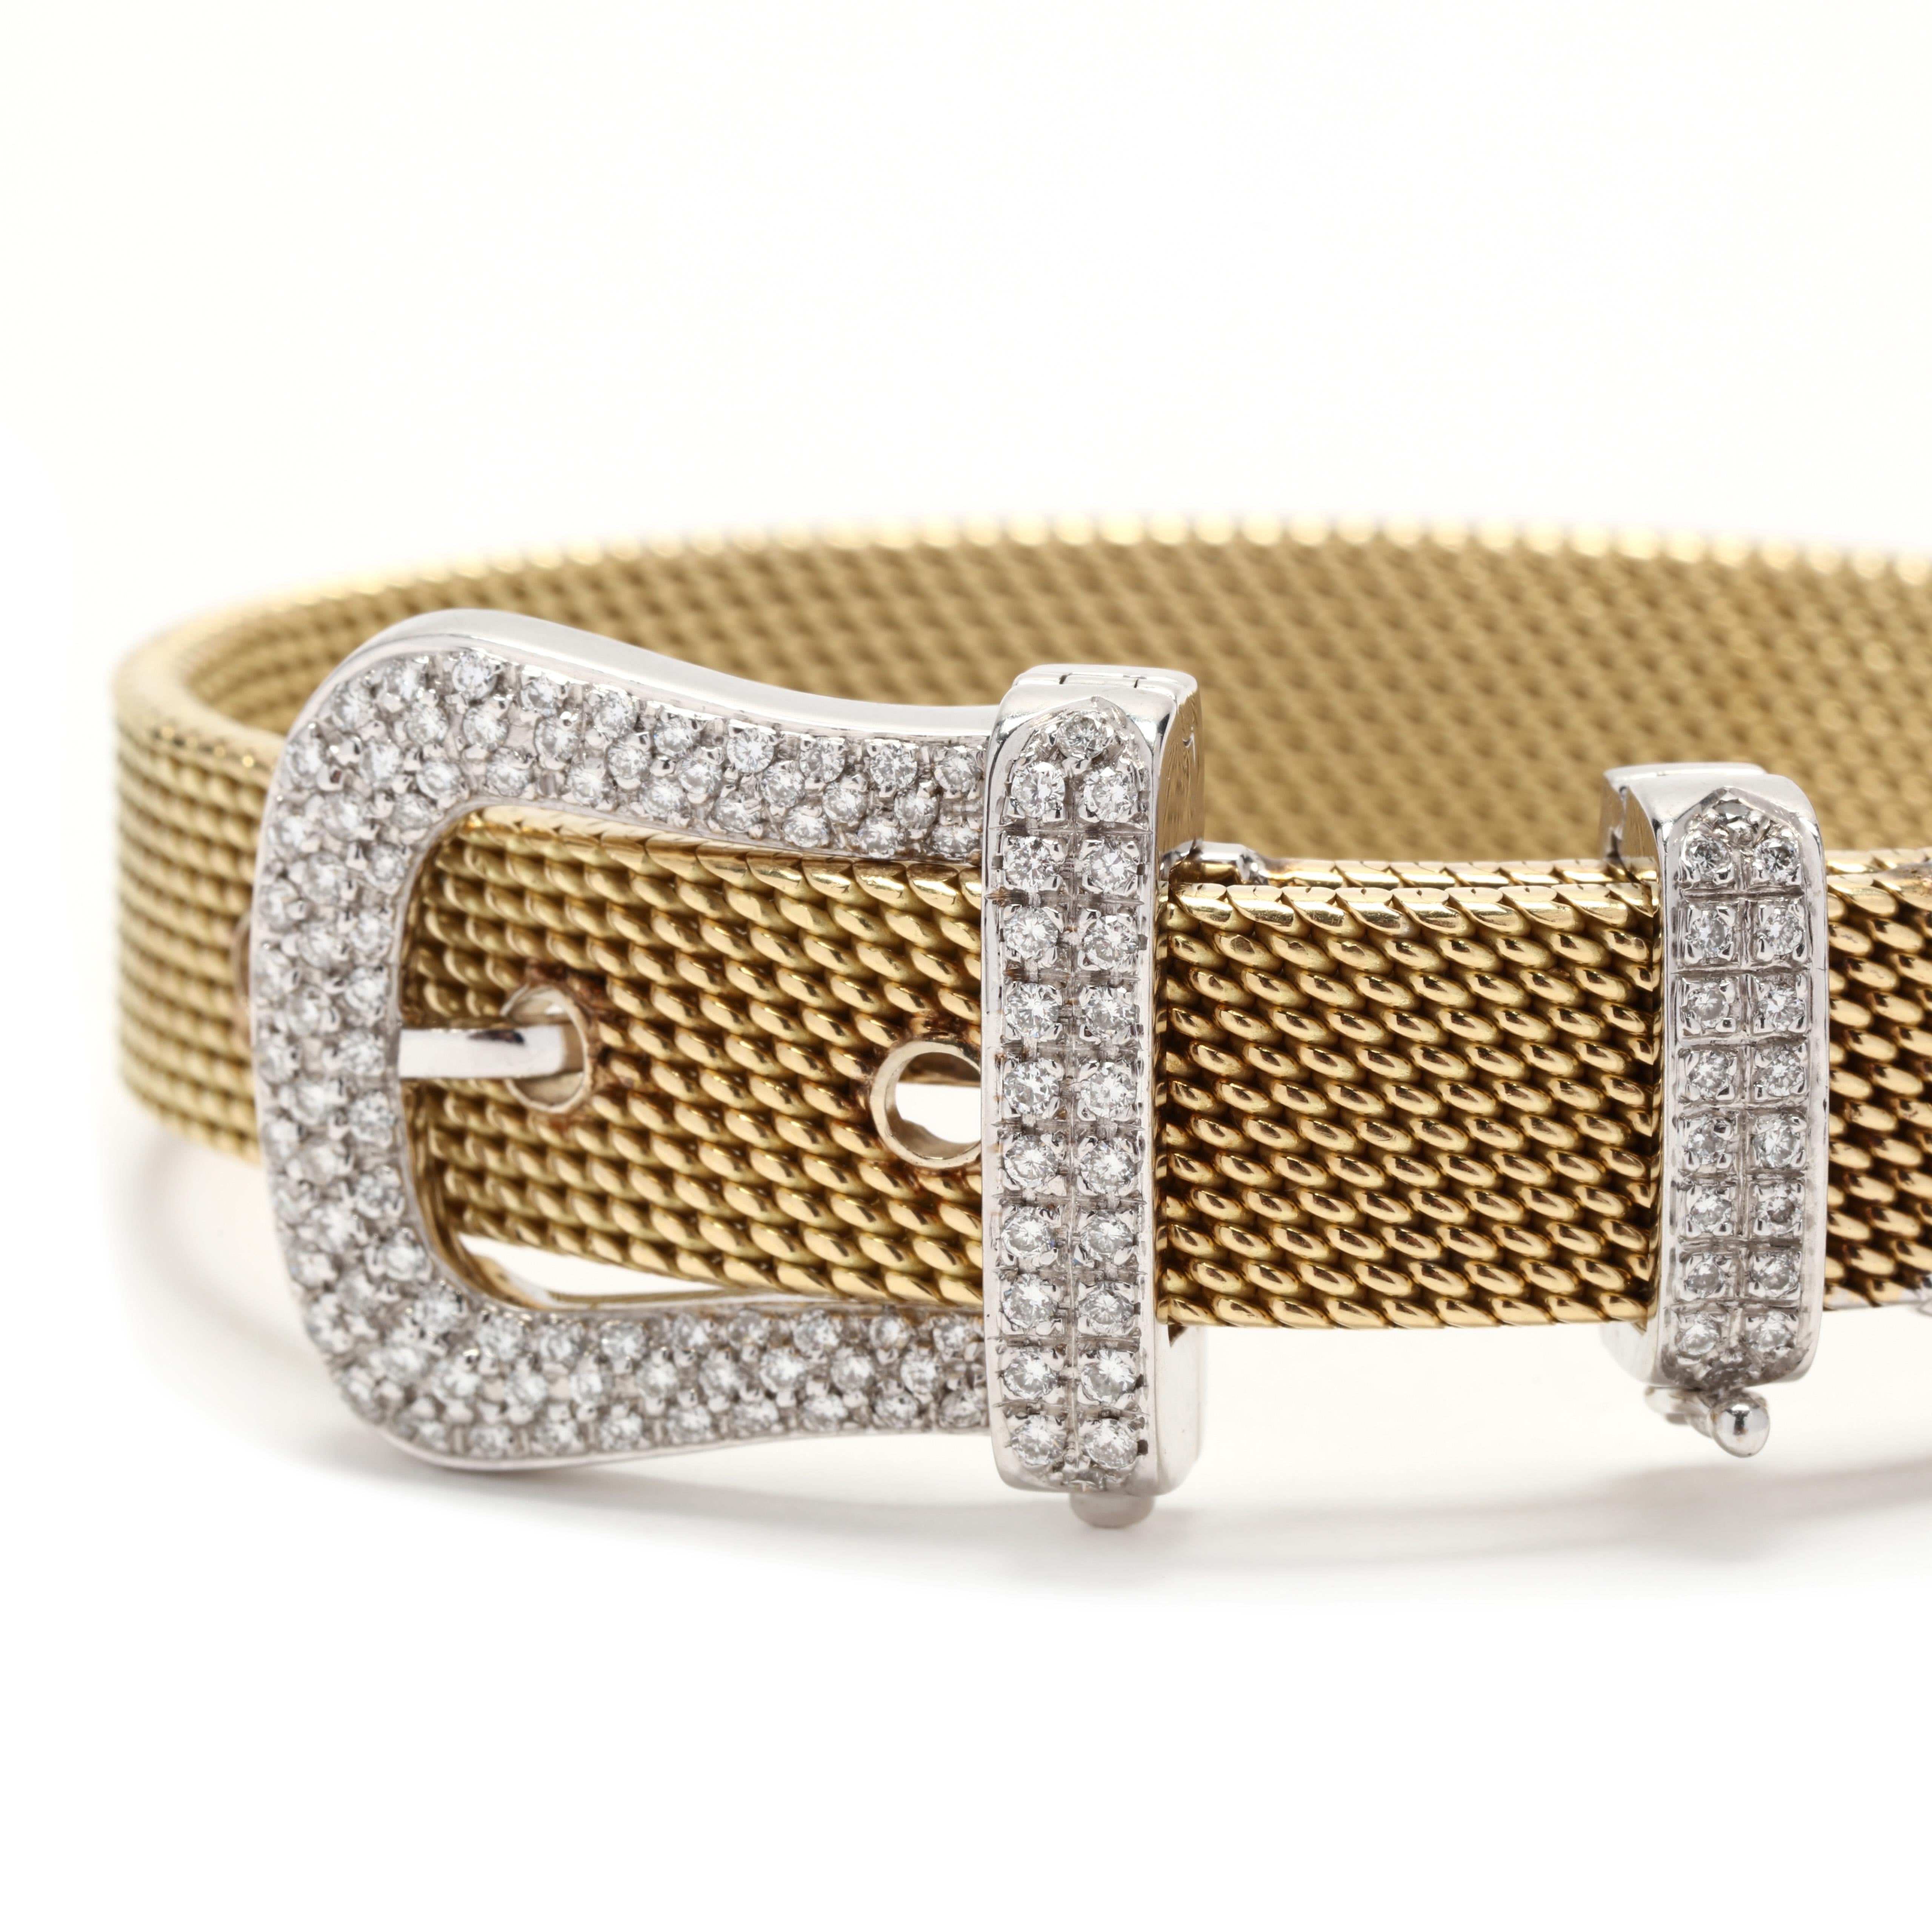 A vintage 18 karat yellow and white gold diamond mesh buckle bracelet. This classic buckle bracelet features a yellow gold mesh link bracelet with a white gold buckle clasp set with round brilliant cut diamonds weighing approximately .75 total